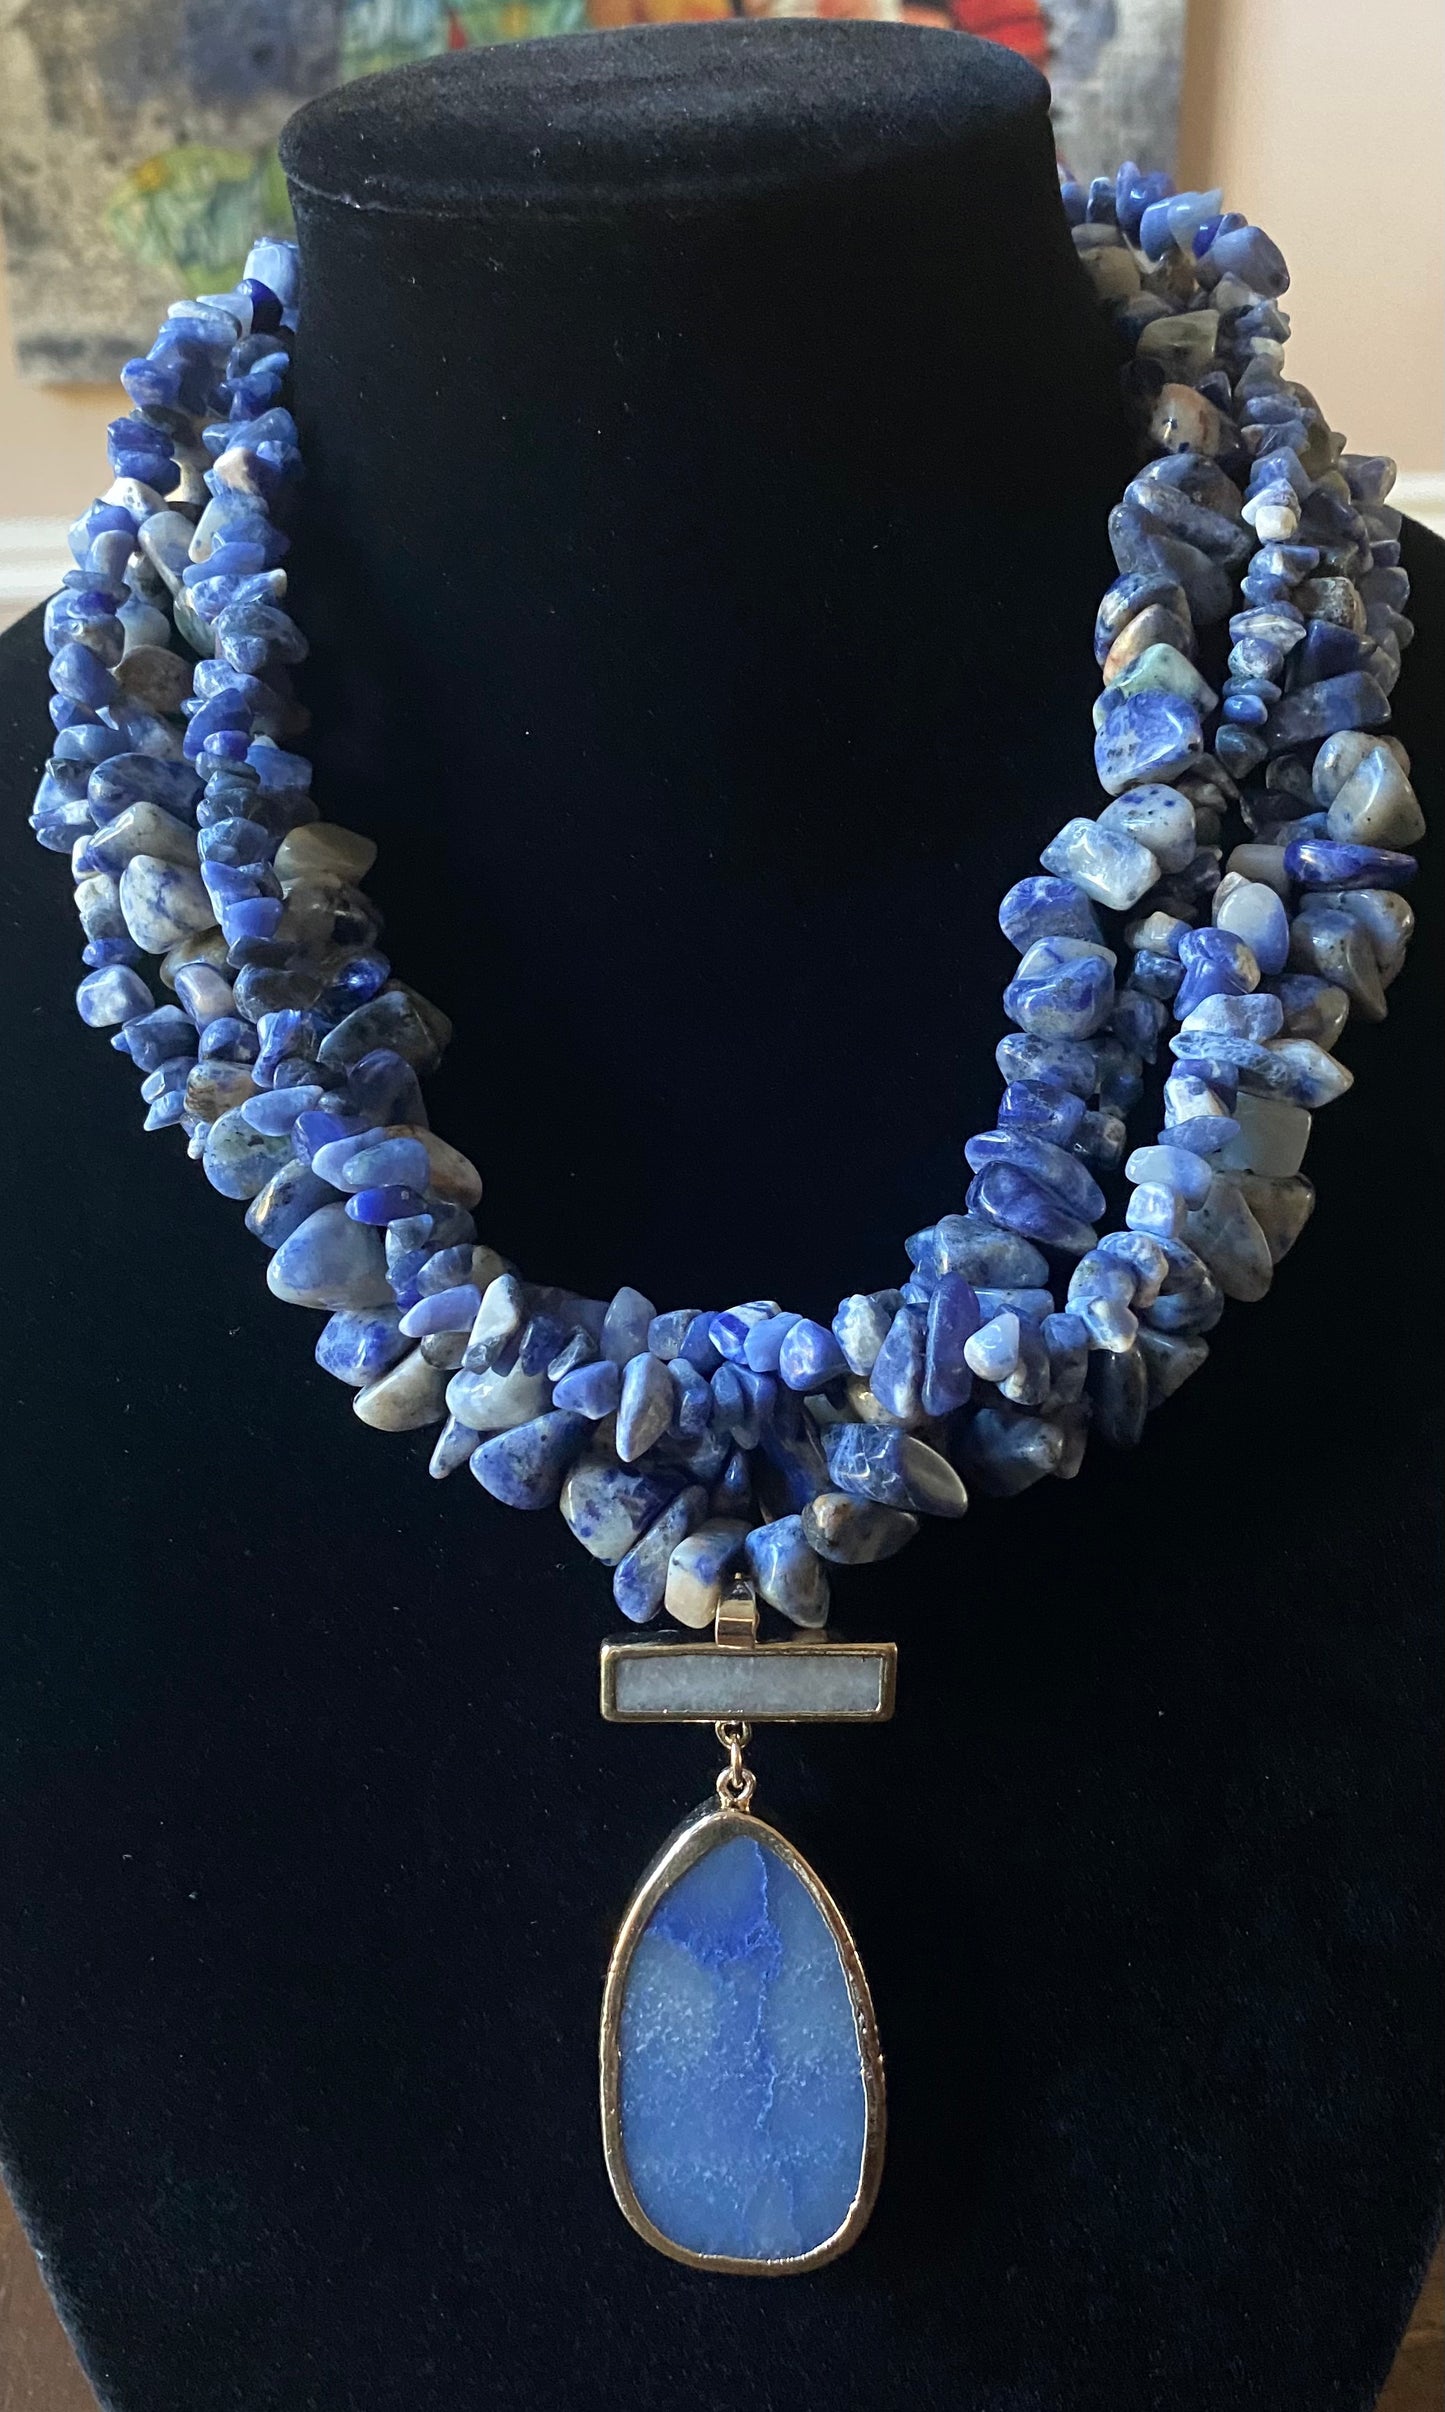 Ladies' Sodalite Chip Necklace with Teardrop Pendant